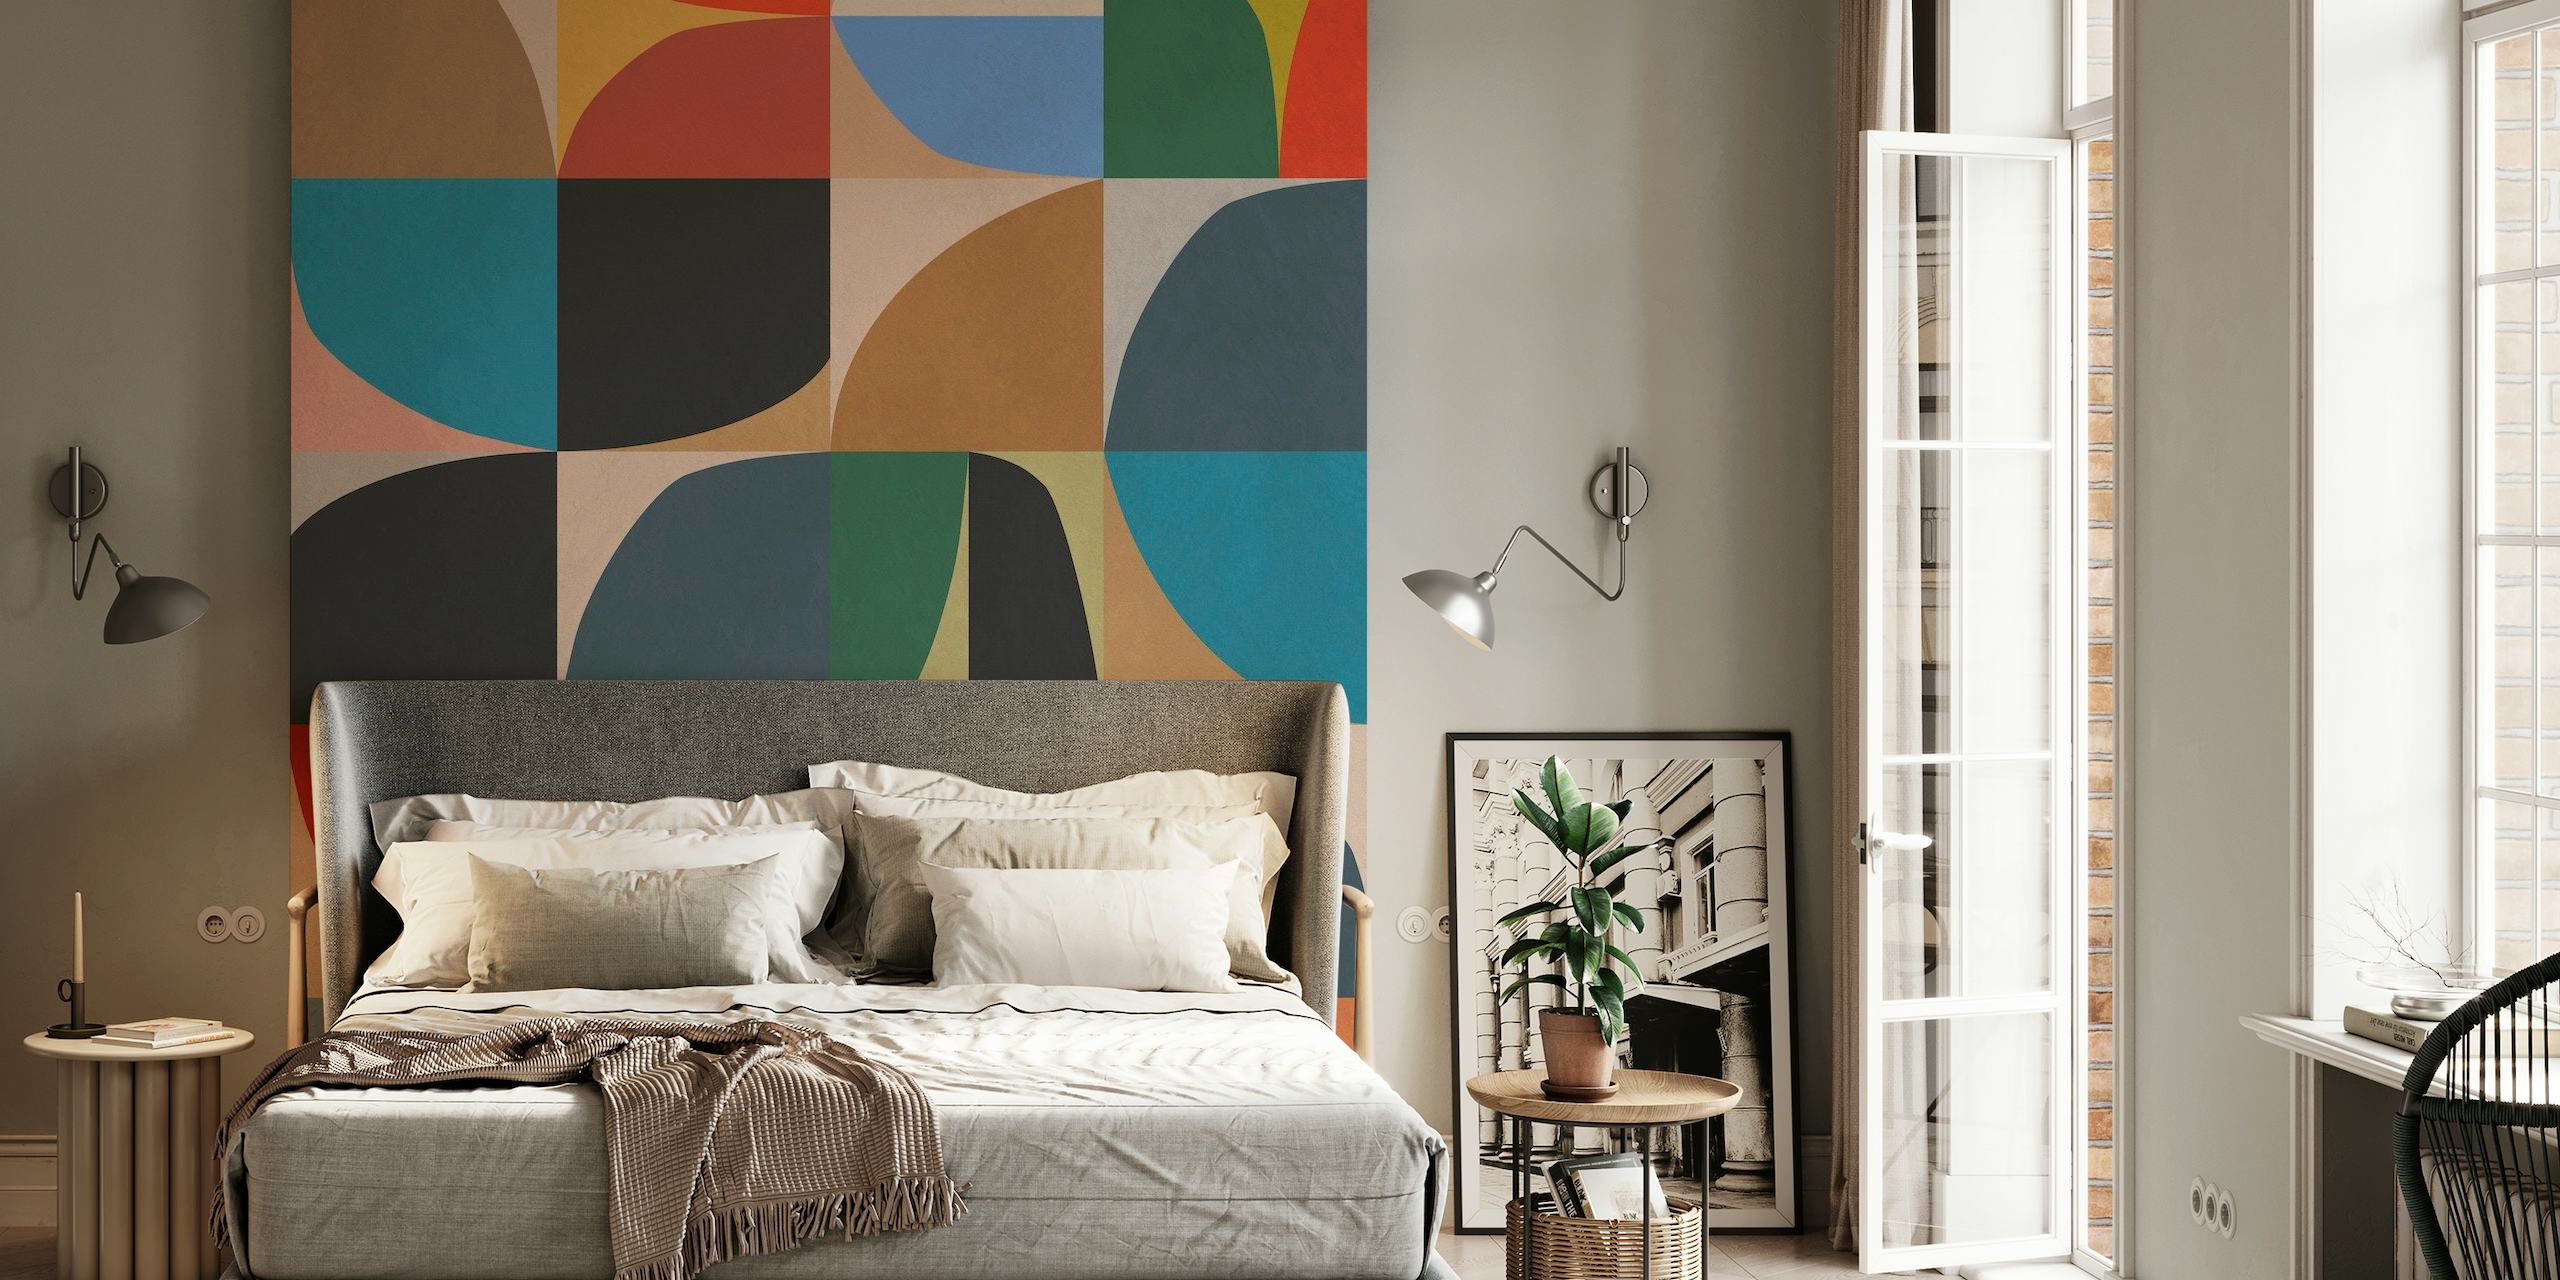 Geometric abstract wall mural with colorful shapes in red, blue, green, and mustard tones